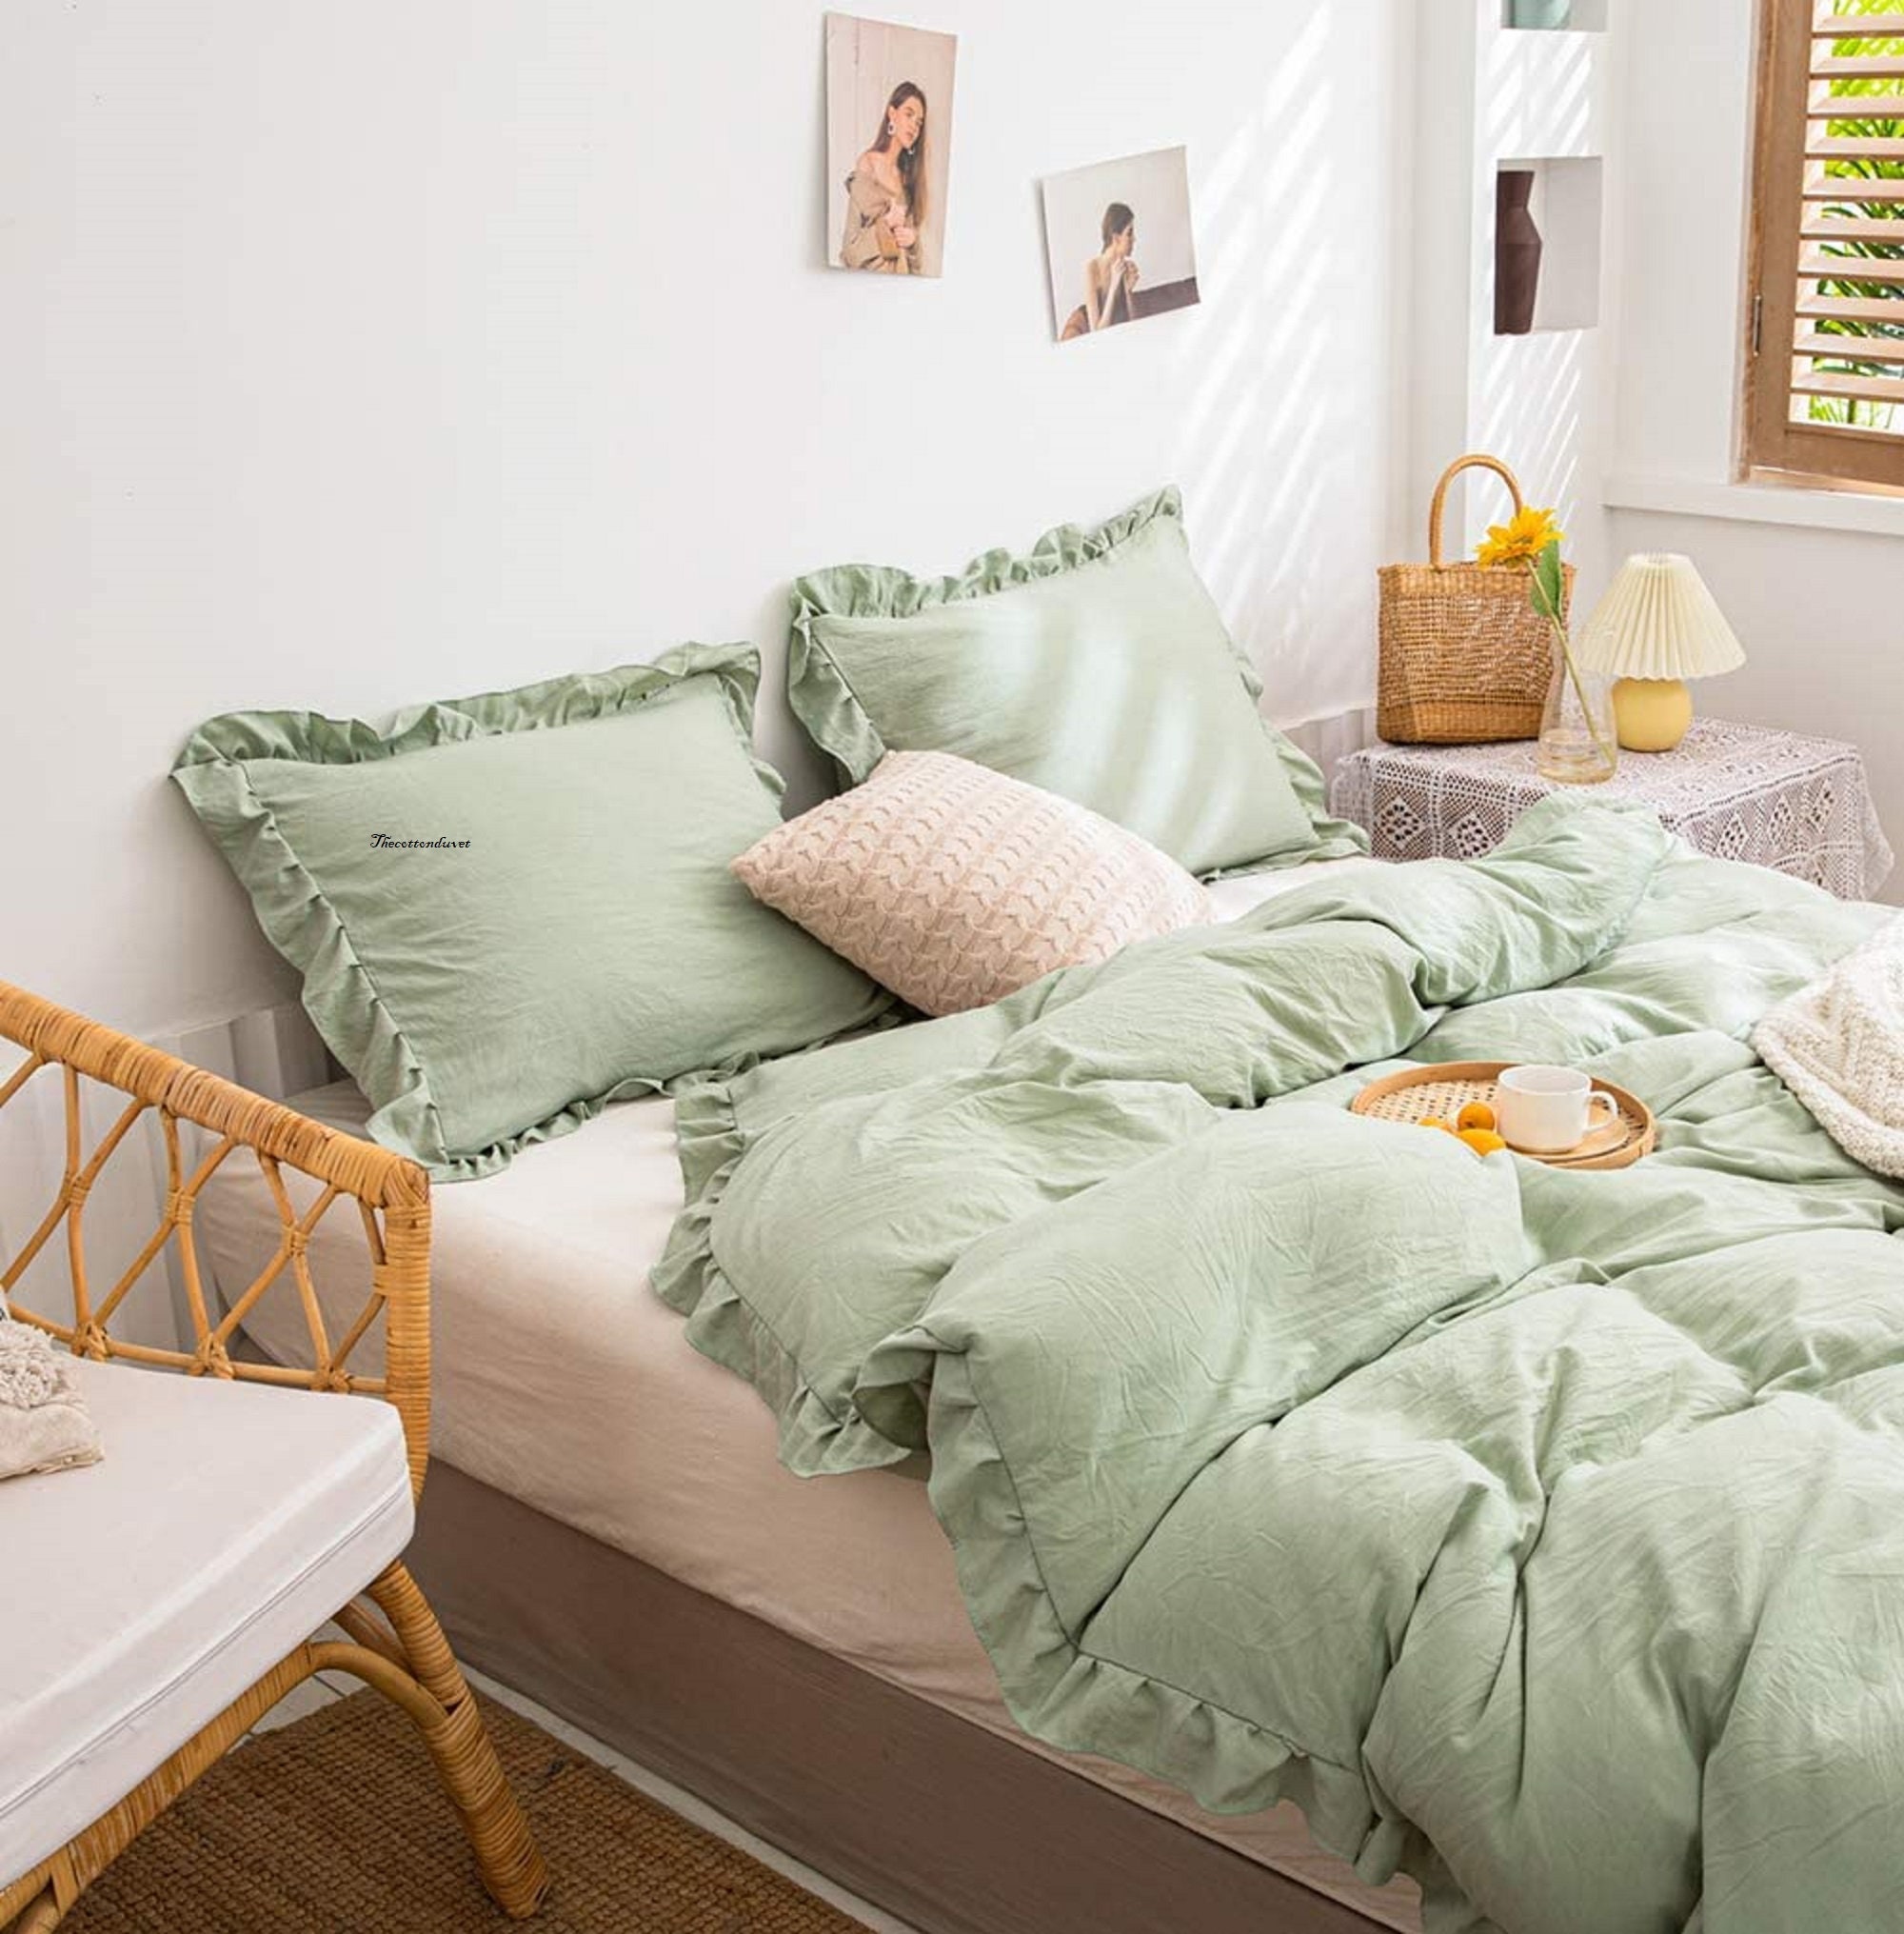 42 Green Bedroom Ideas That Will Inspire You